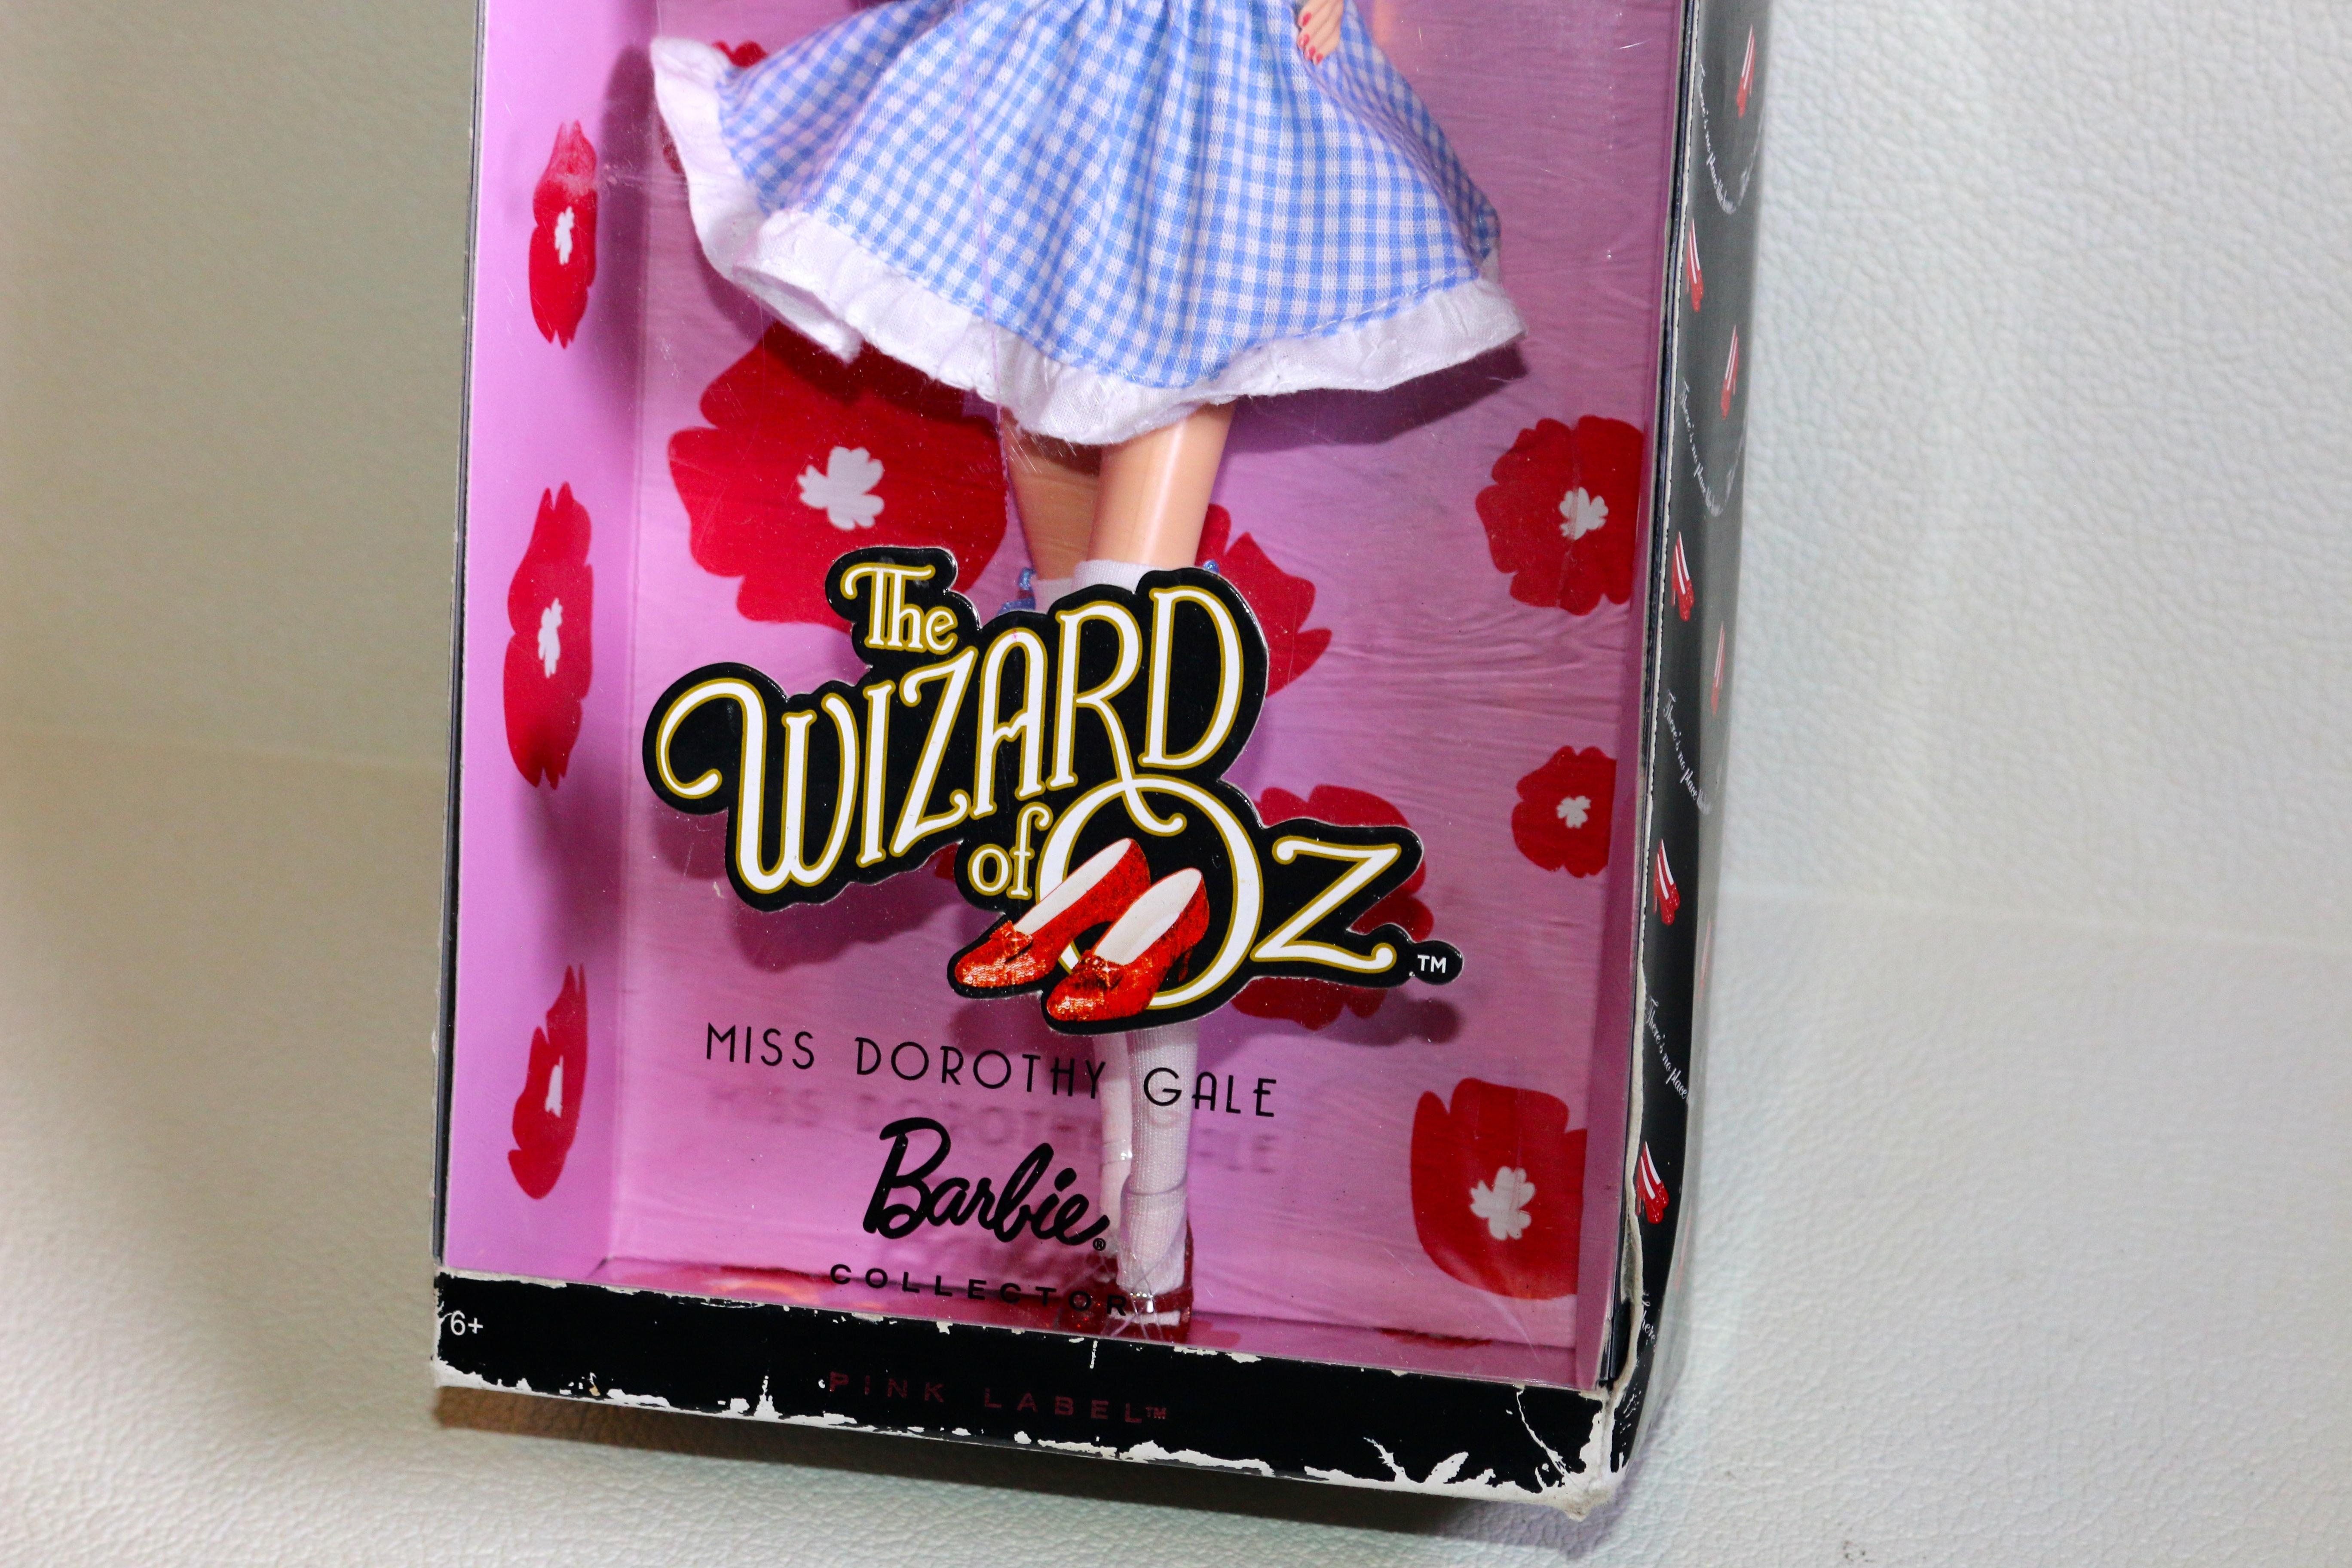 Celebrity and movie star Barbie dolls
Series:
Wizard of OZ, Dorothy Gale.